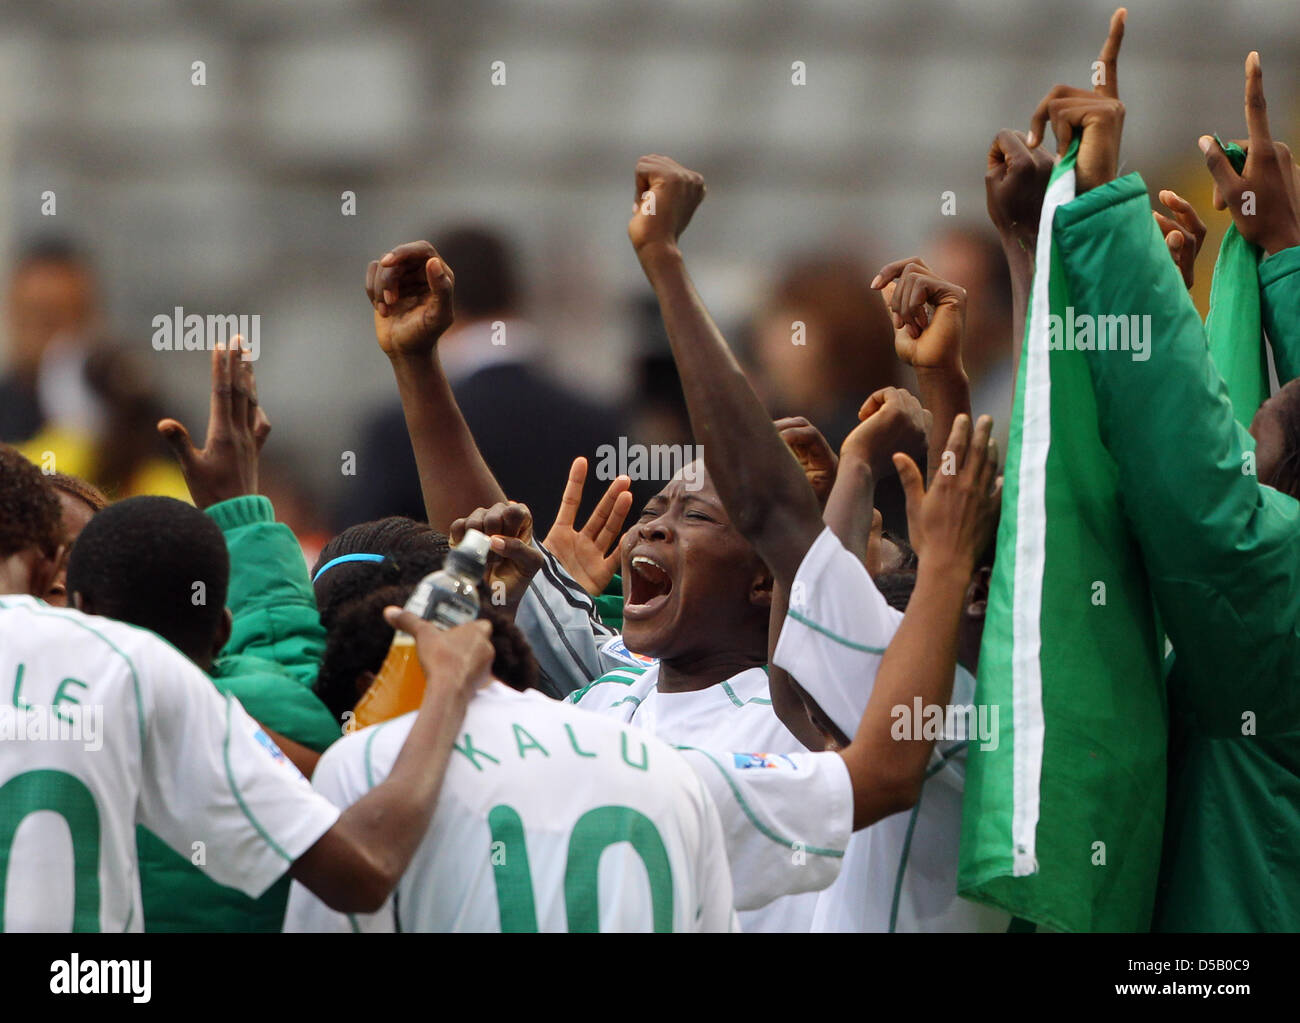 The Nigerian team celebrates its 1:0 win over Colombia and its progression to the final against Germany at the U-20 Women's Soccer World Cup in Bielefeld, Germany, 29 July 2010. Photo: Friso Gentsch Stock Photo